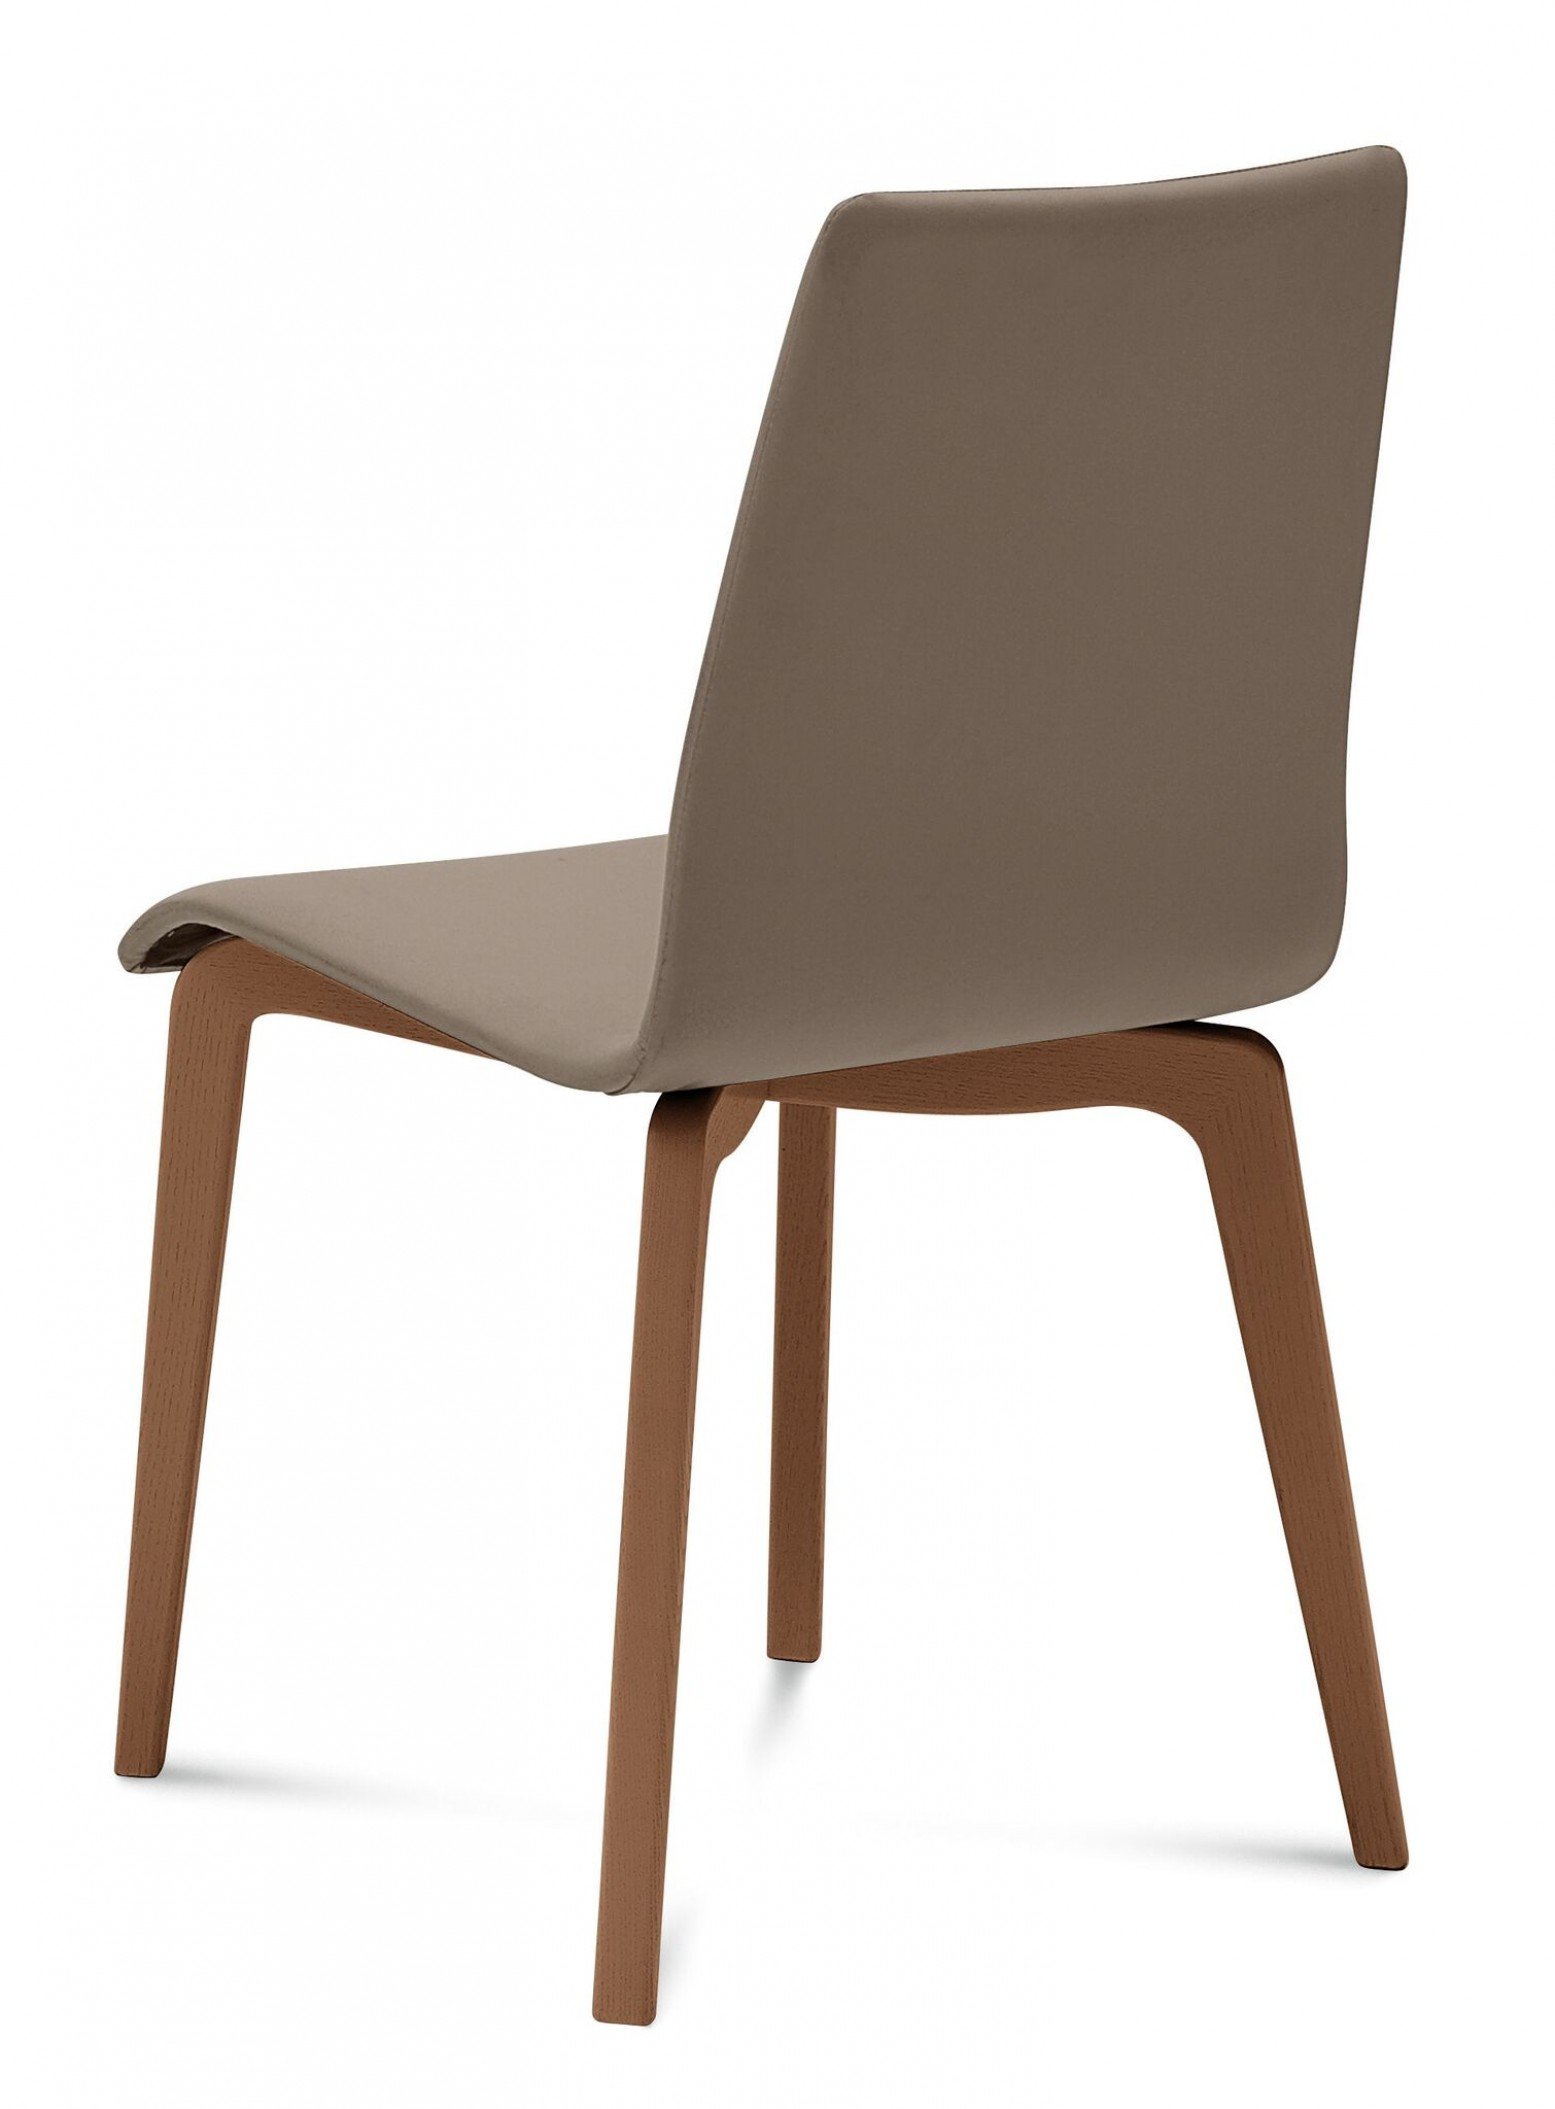 judel chair walnut canaletto legs  skill taupe pvc seat